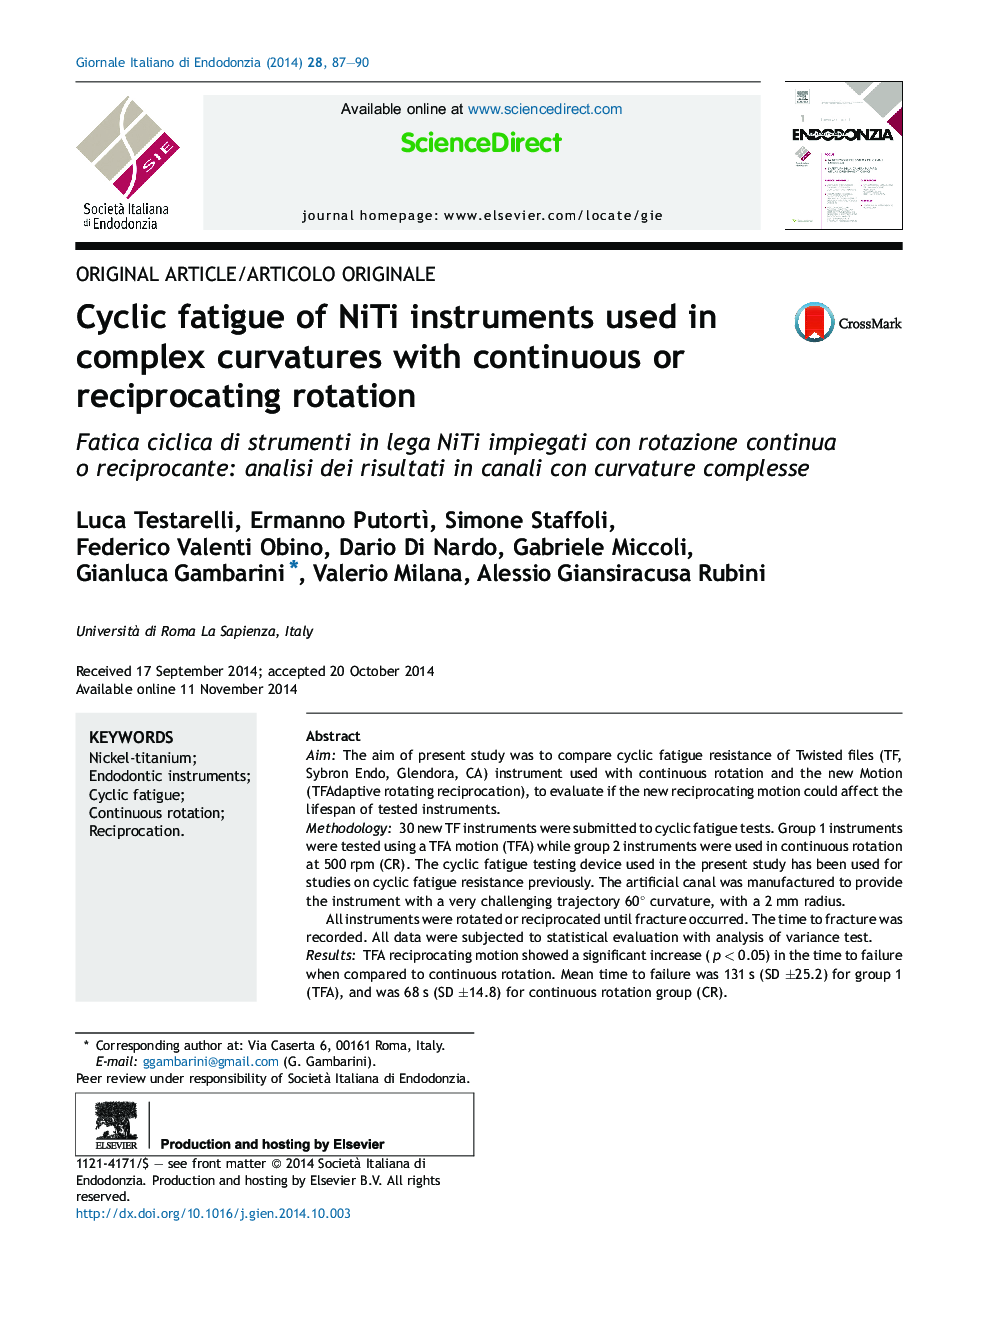 Cyclic fatigue of NiTi instruments used in complex curvatures with continuous or reciprocating rotation 